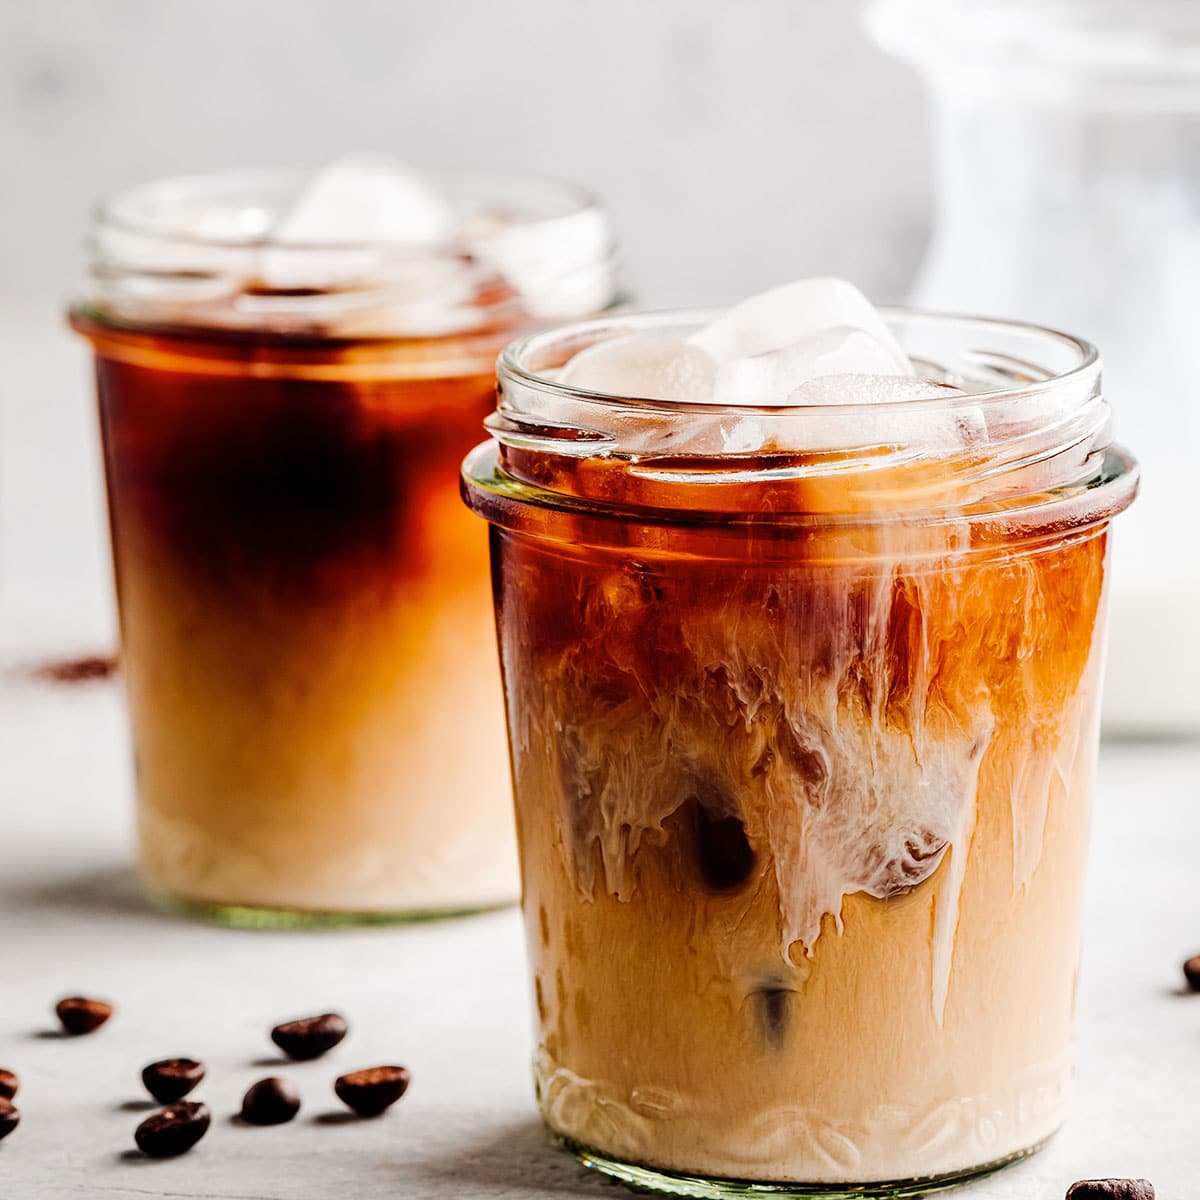 Do you know the difference between iced coffee vs iced latte? Many people think they’re the same thing; however, there are some important differences between them.